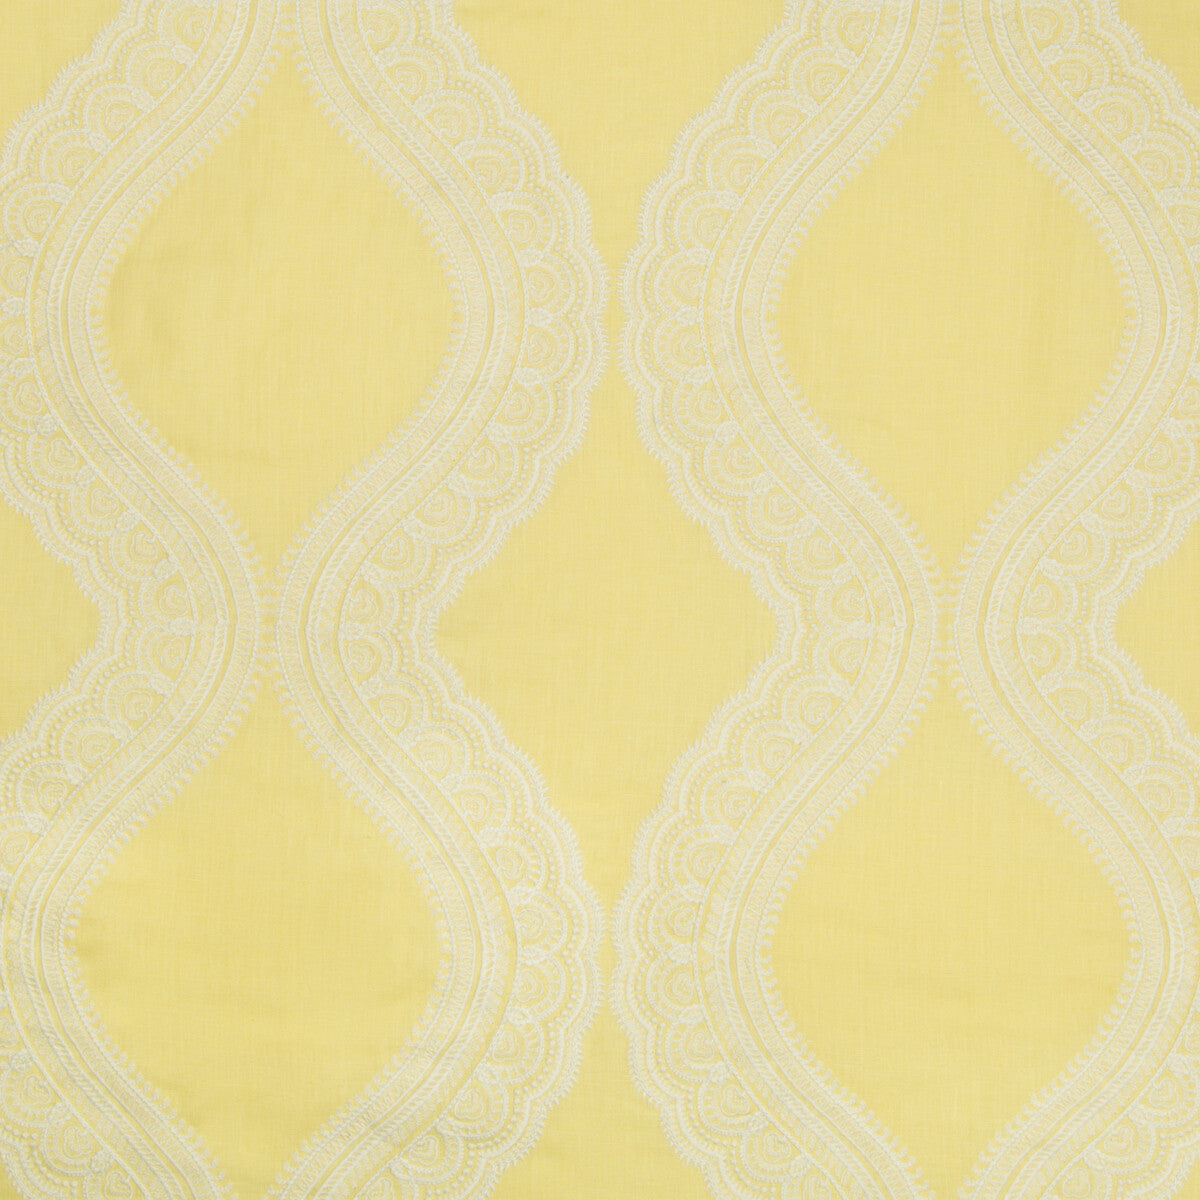 Isoline Emb fabric in canary color - pattern 8017106.14.0 - by Brunschwig &amp; Fils in the Le Parnasse collection